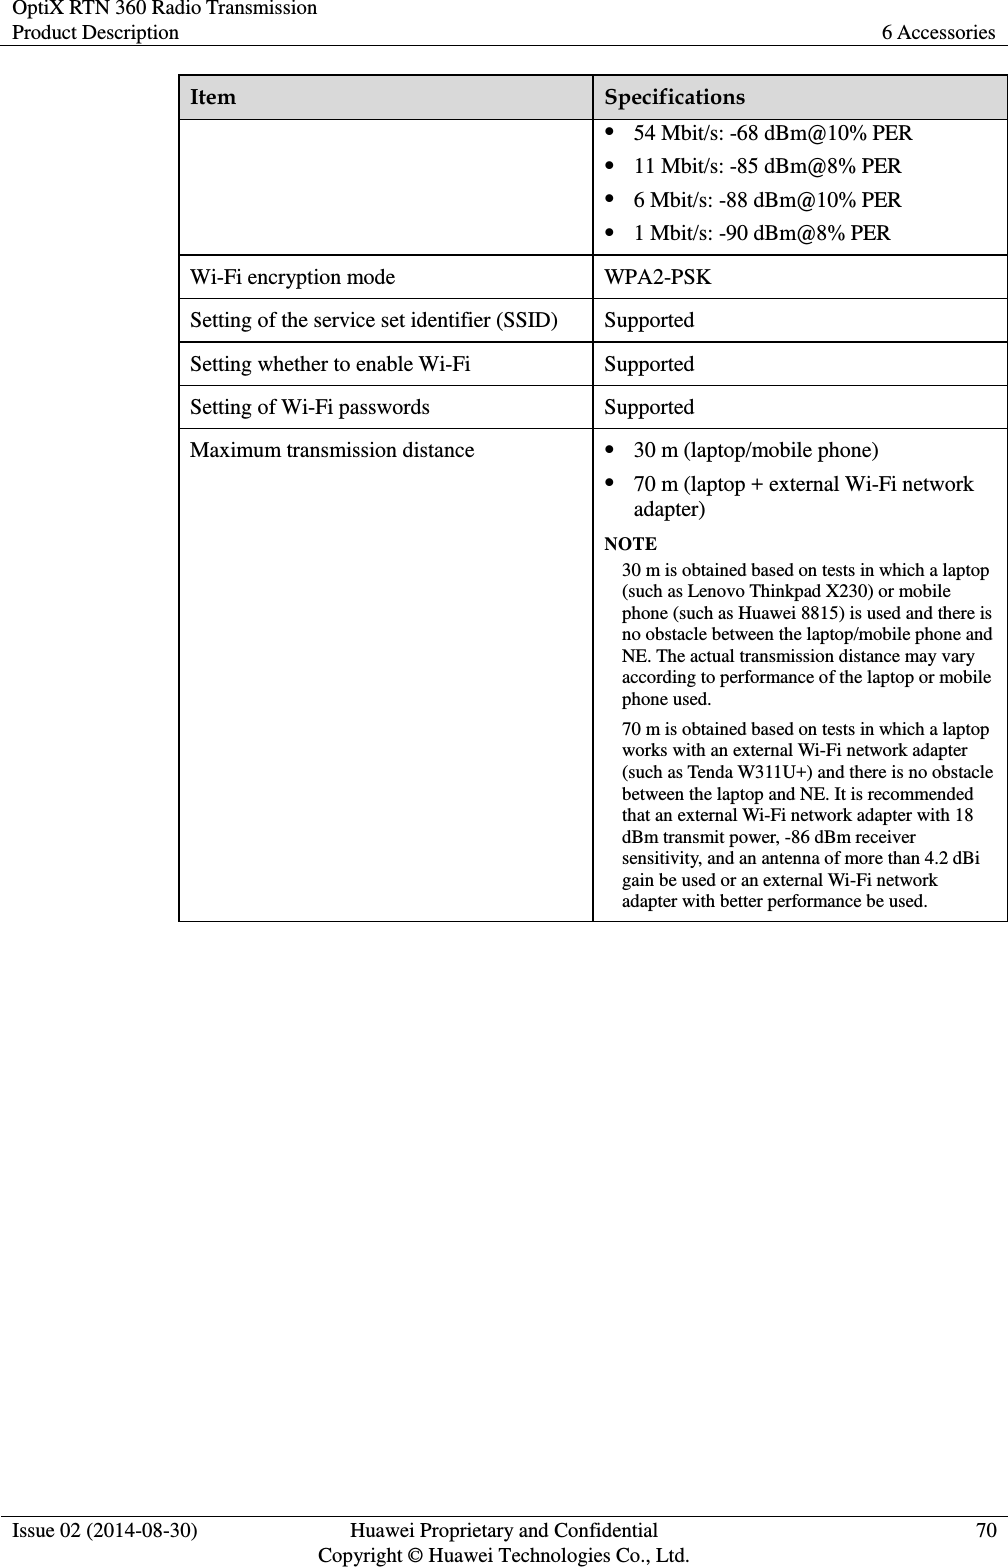 OptiX RTN 360 Radio Transmission Product Description 6 Accessories  Issue 02 (2014-08-30) Huawei Proprietary and Confidential                                     Copyright © Huawei Technologies Co., Ltd. 70  Item Specifications  54 Mbit/s: -68 dBm@10% PER  11 Mbit/s: -85 dBm@8% PER  6 Mbit/s: -88 dBm@10% PER  1 Mbit/s: -90 dBm@8% PER Wi-Fi encryption mode WPA2-PSK Setting of the service set identifier (SSID) Supported Setting whether to enable Wi-Fi Supported Setting of Wi-Fi passwords Supported Maximum transmission distance  30 m (laptop/mobile phone)  70 m (laptop + external Wi-Fi network adapter) NOTE 30 m is obtained based on tests in which a laptop (such as Lenovo Thinkpad X230) or mobile phone (such as Huawei 8815) is used and there is no obstacle between the laptop/mobile phone and NE. The actual transmission distance may vary according to performance of the laptop or mobile phone used. 70 m is obtained based on tests in which a laptop works with an external Wi-Fi network adapter (such as Tenda W311U+) and there is no obstacle between the laptop and NE. It is recommended that an external Wi-Fi network adapter with 18 dBm transmit power, -86 dBm receiver sensitivity, and an antenna of more than 4.2 dBi gain be used or an external Wi-Fi network adapter with better performance be used. 